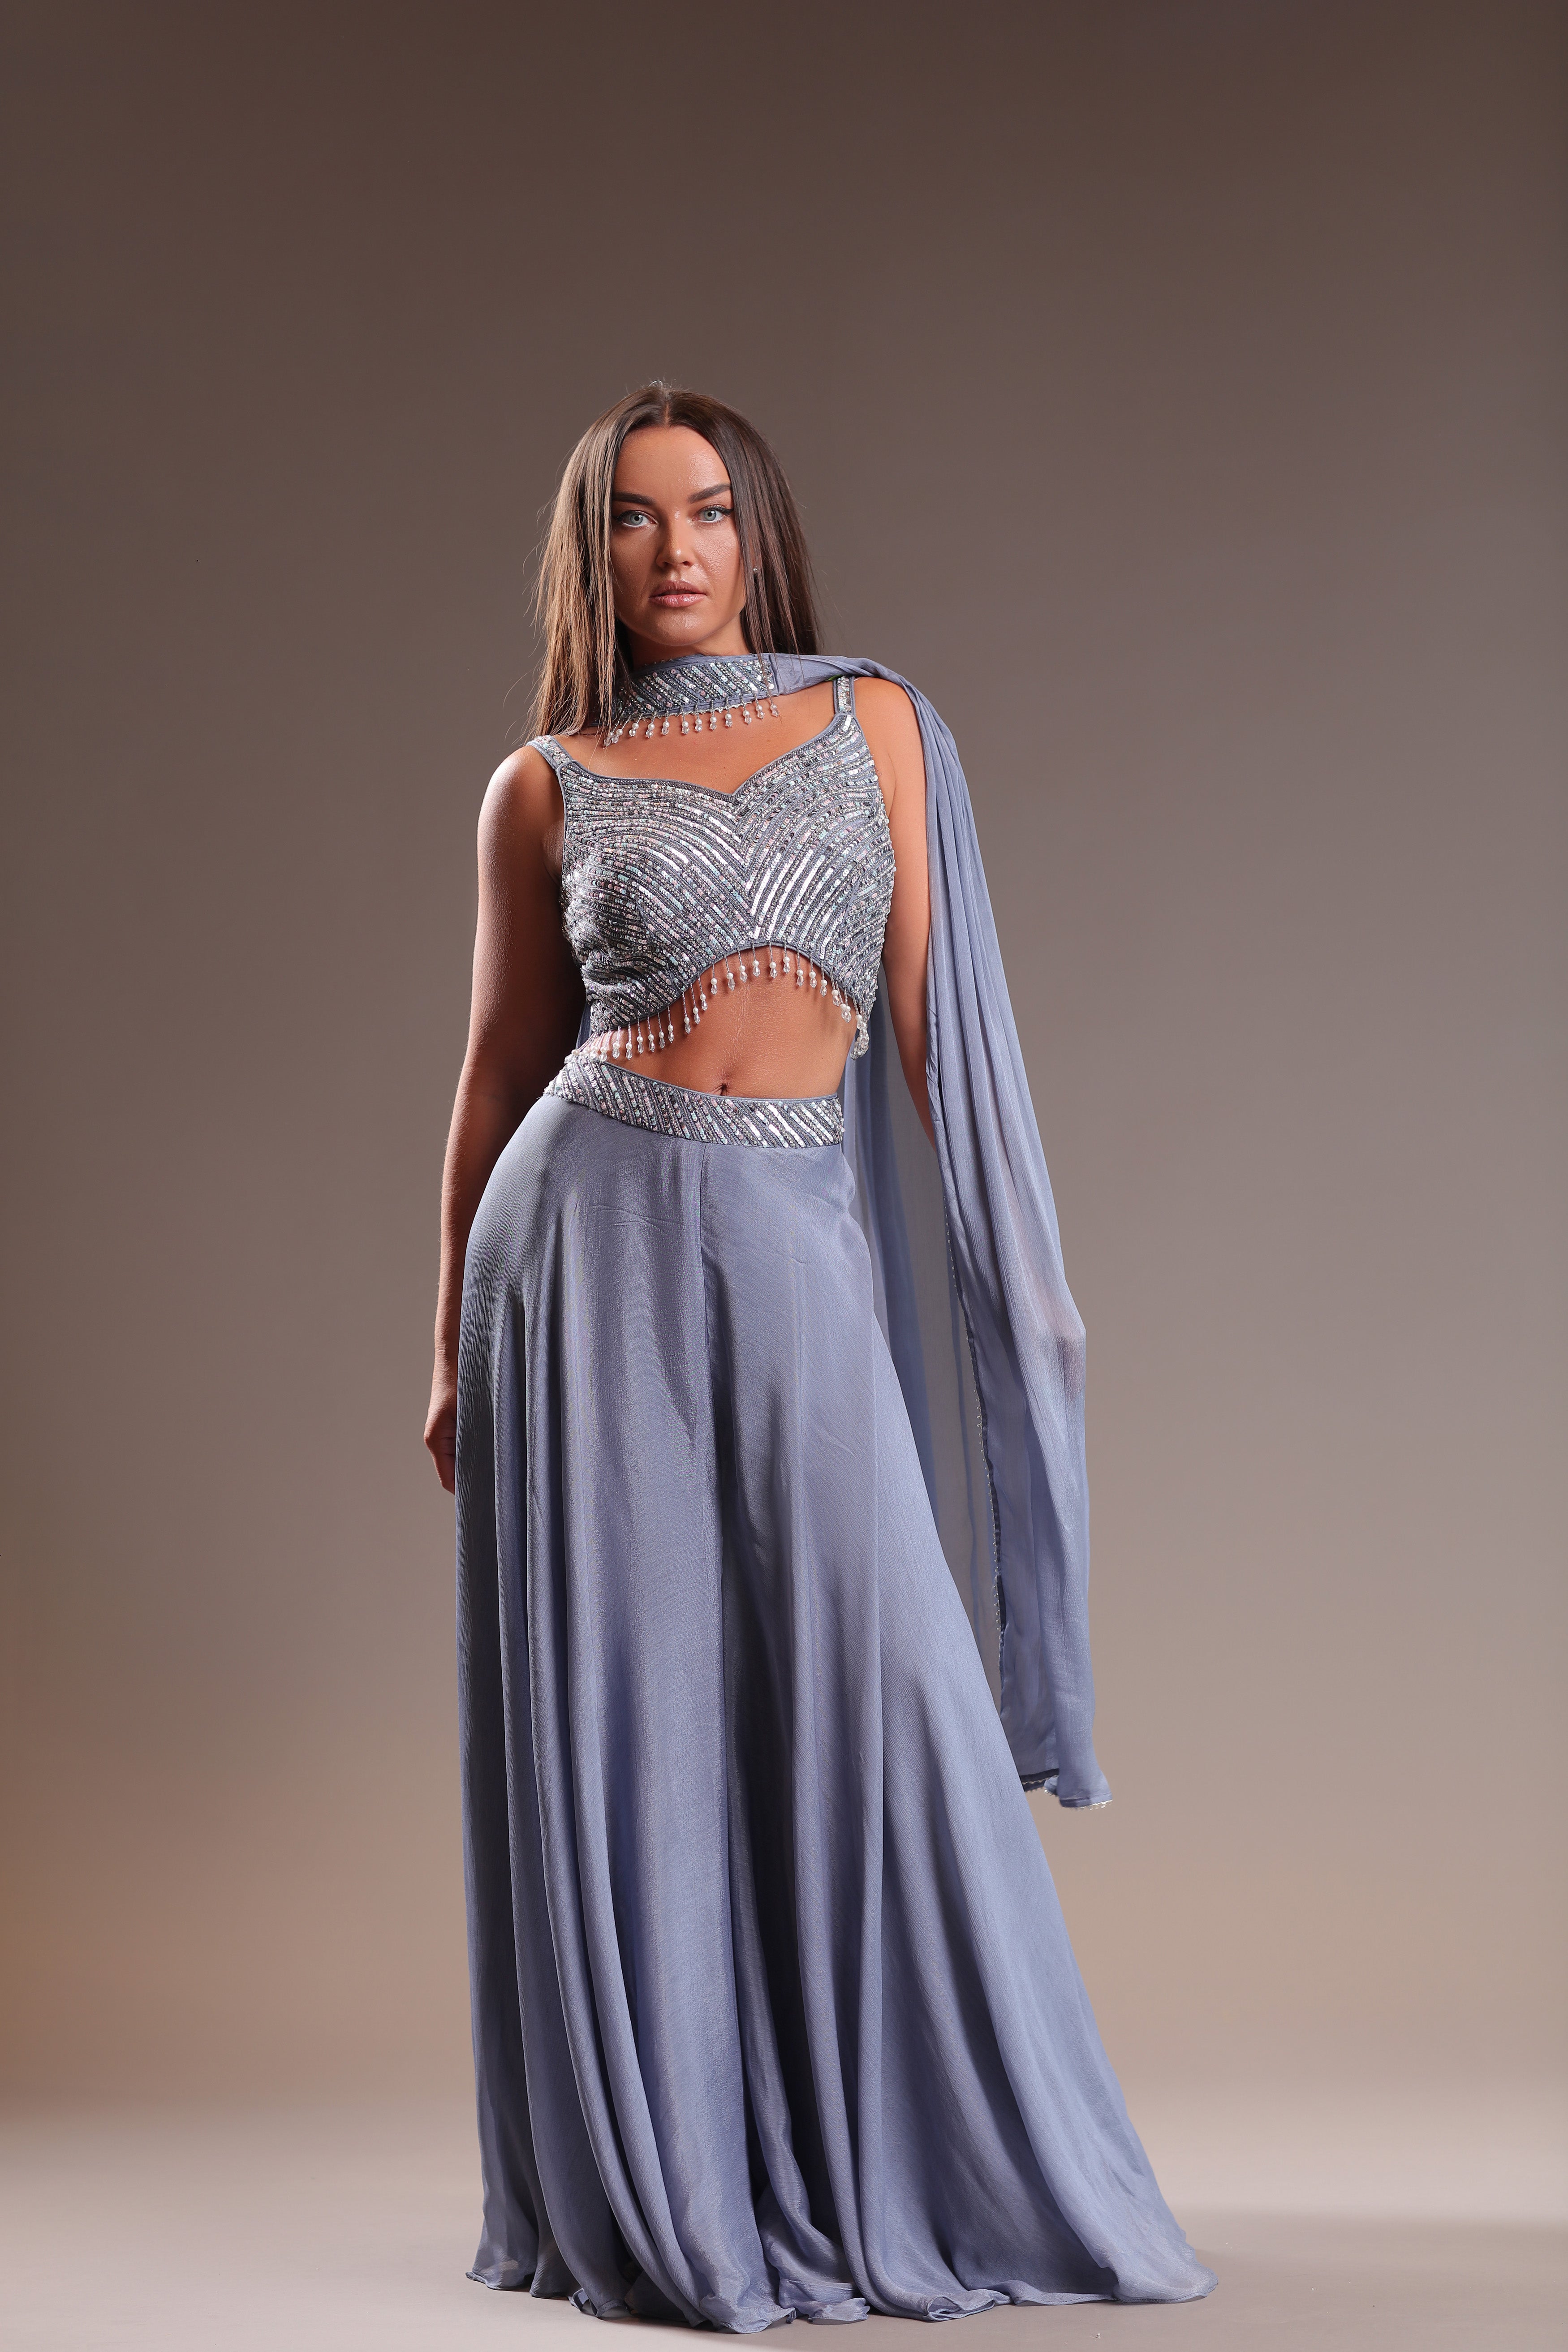 Chic Moonlight Ensemble Featuring Sharara and Sequined Blouse